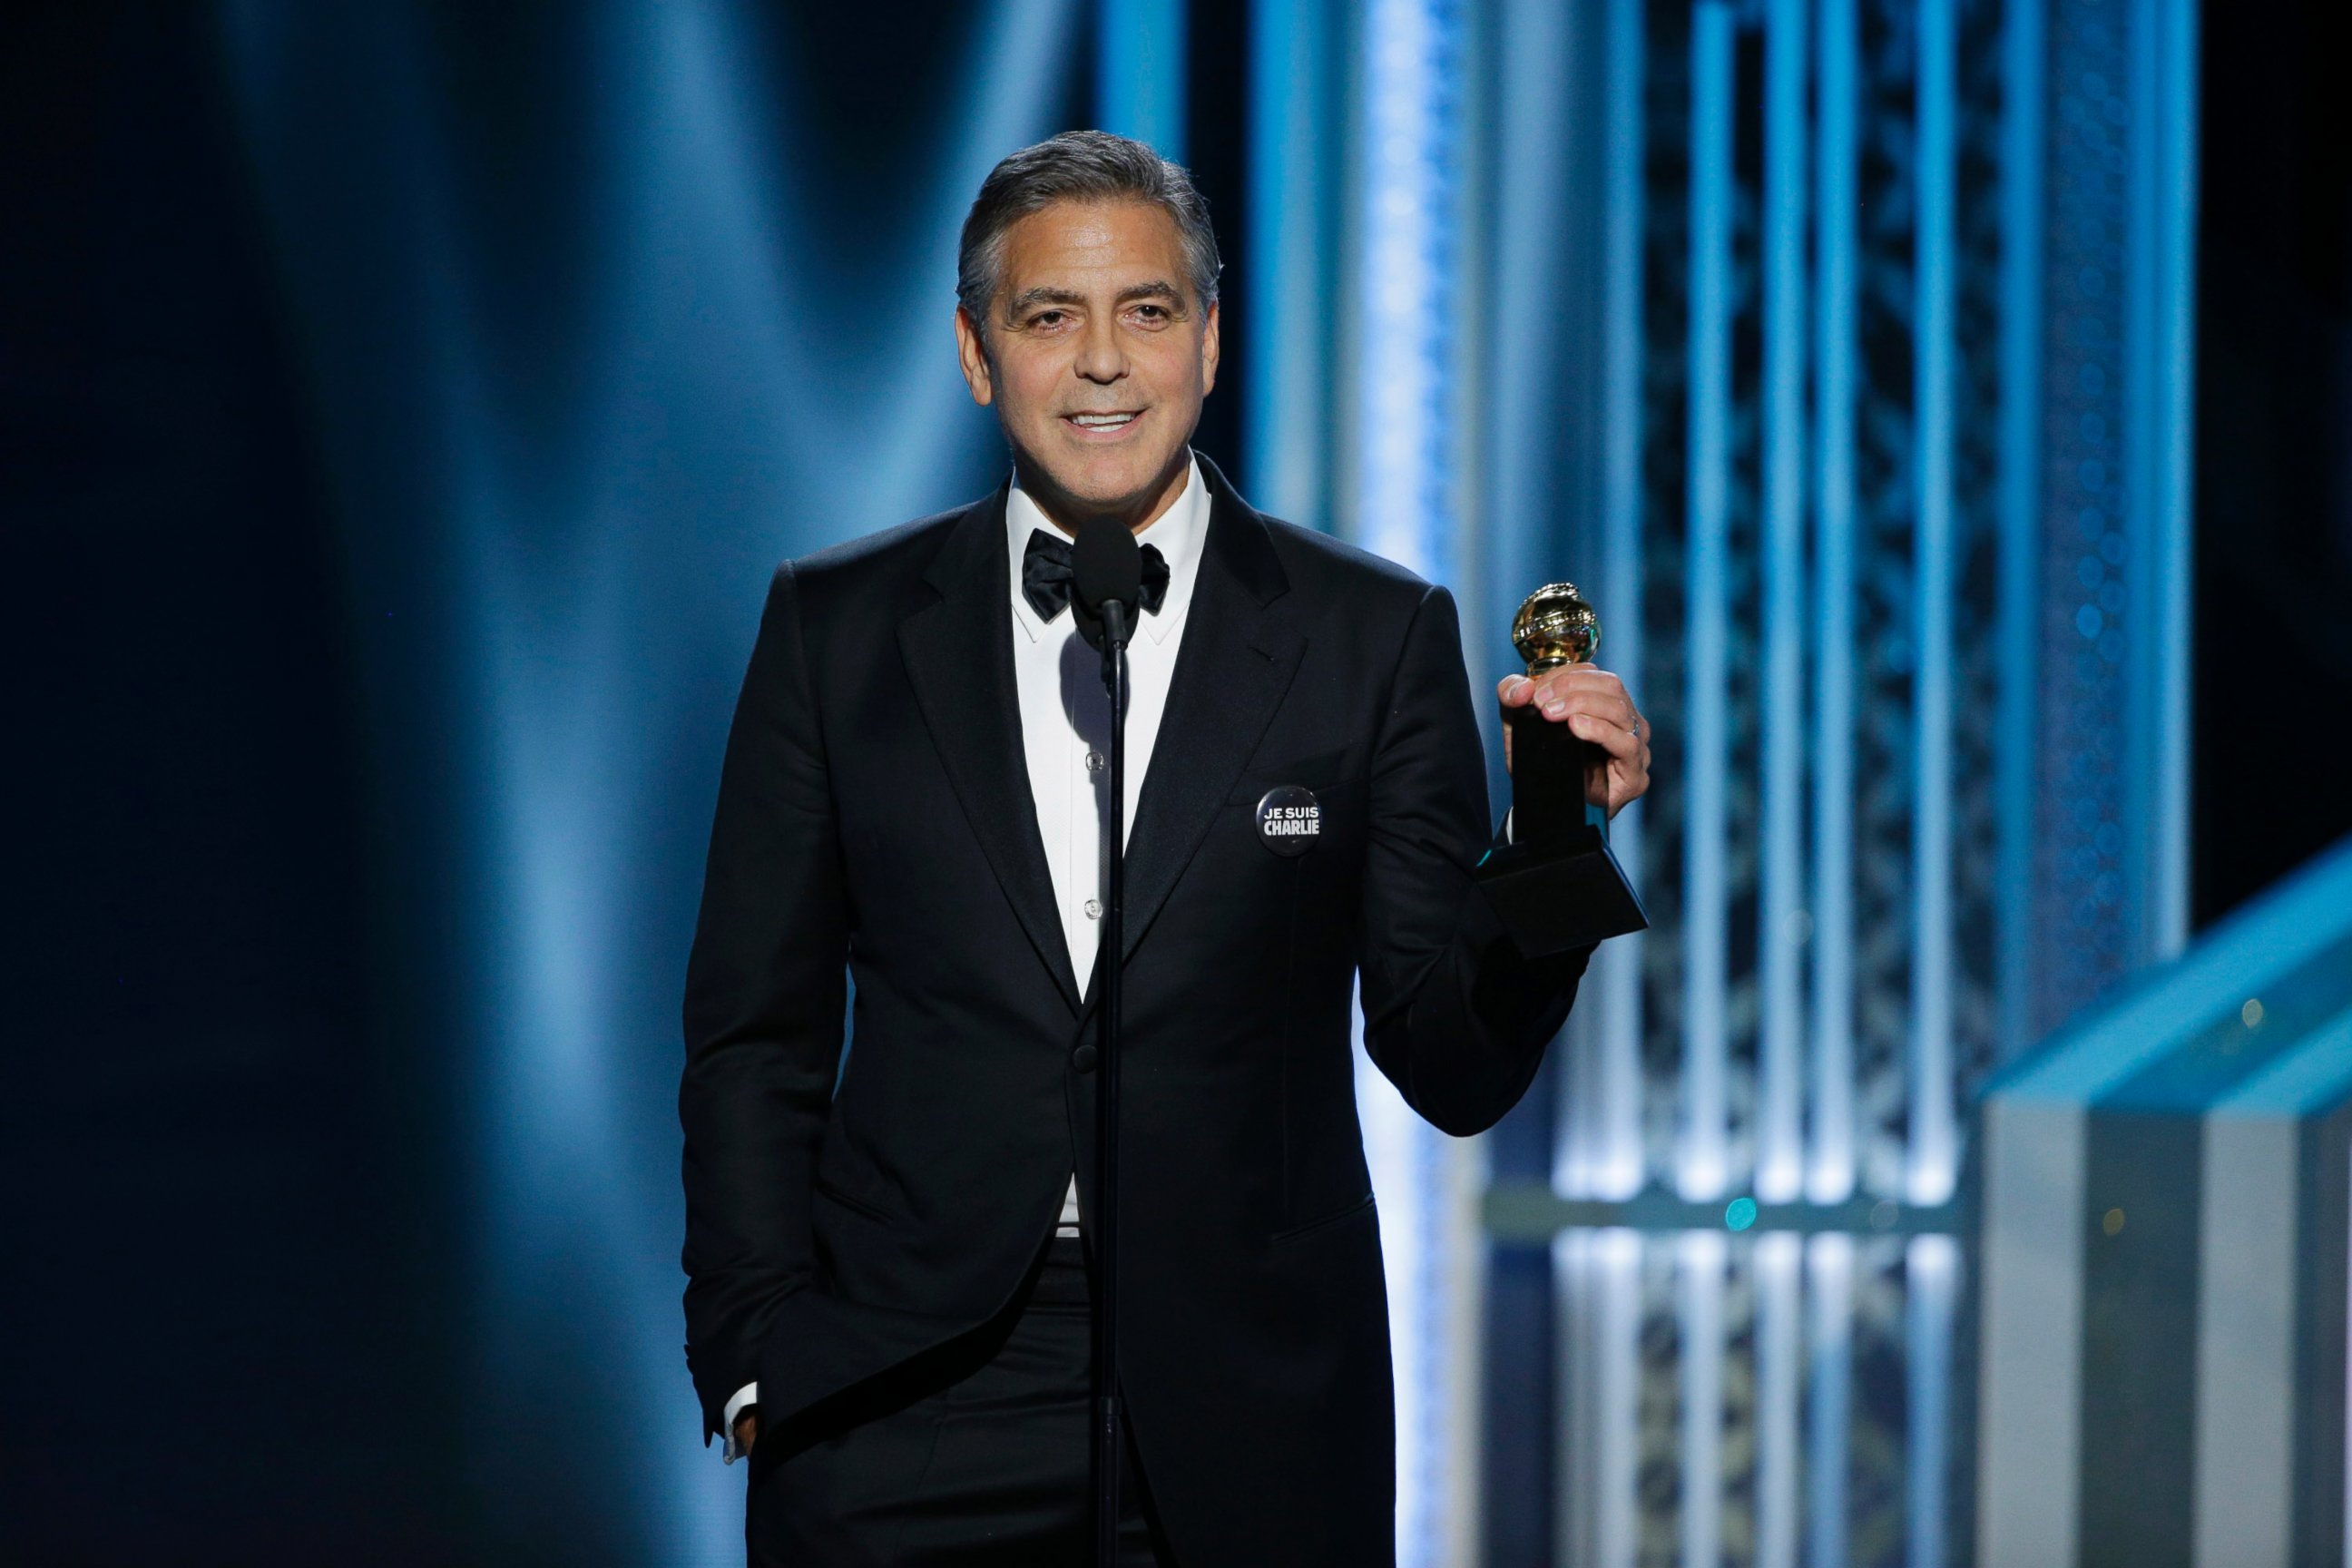 PHOTO: George Clooney, Winner of the Cecile B. Demille Award, speaks onstage during the 72nd Annual Golden Globe Awards at The Beverly Hilton Hotel, Jan. 11, 2015 in Beverly Hills, Calif. 